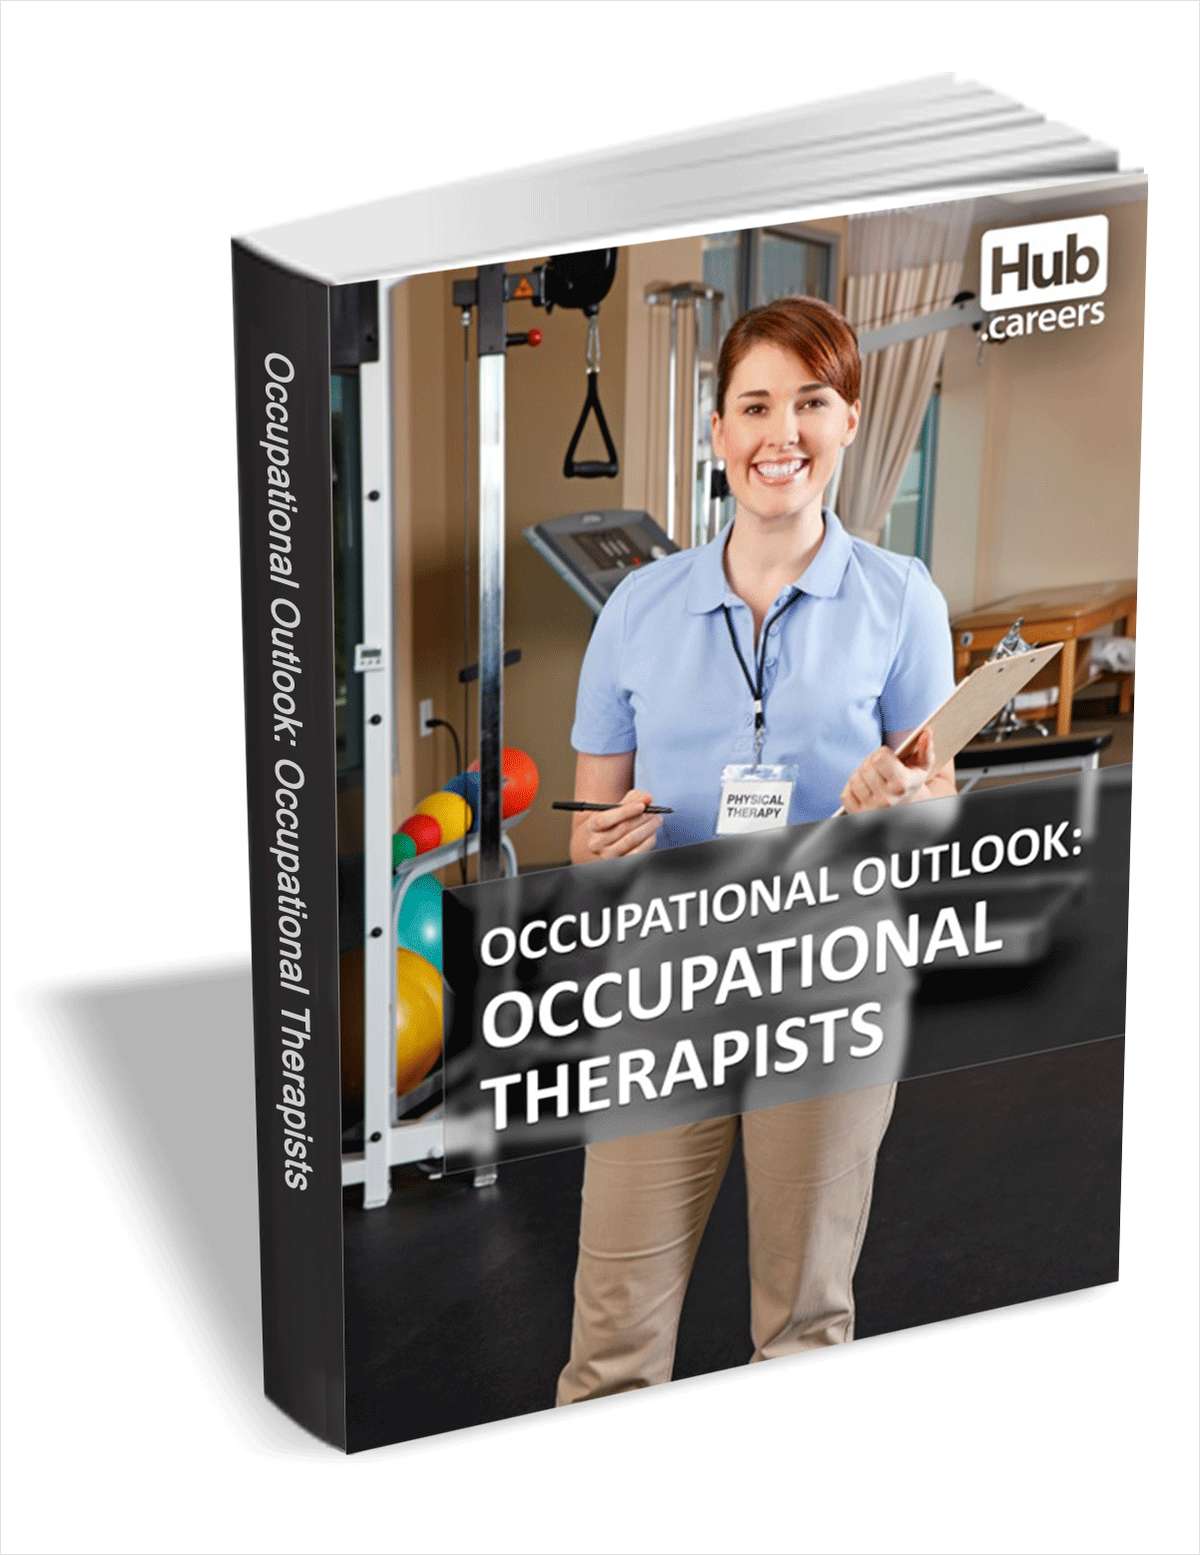 Occupational Therapists - Occupational Outlook